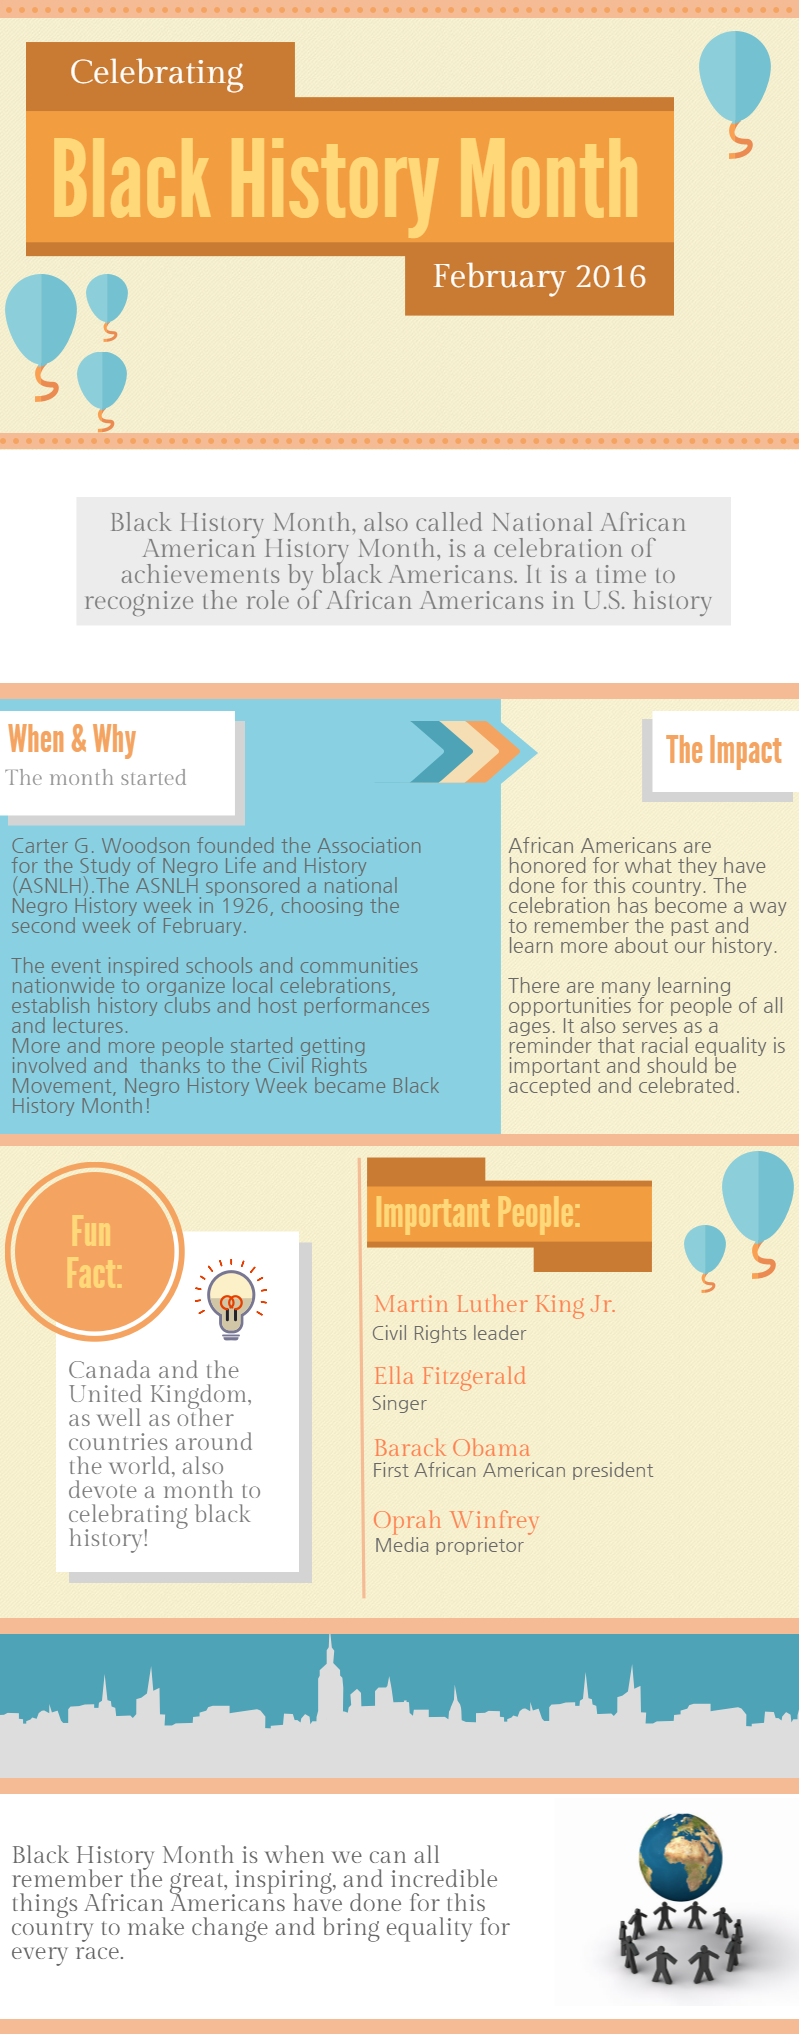 Click to enlarge. Infographic created by Bailey Armosky on piktochart.com.